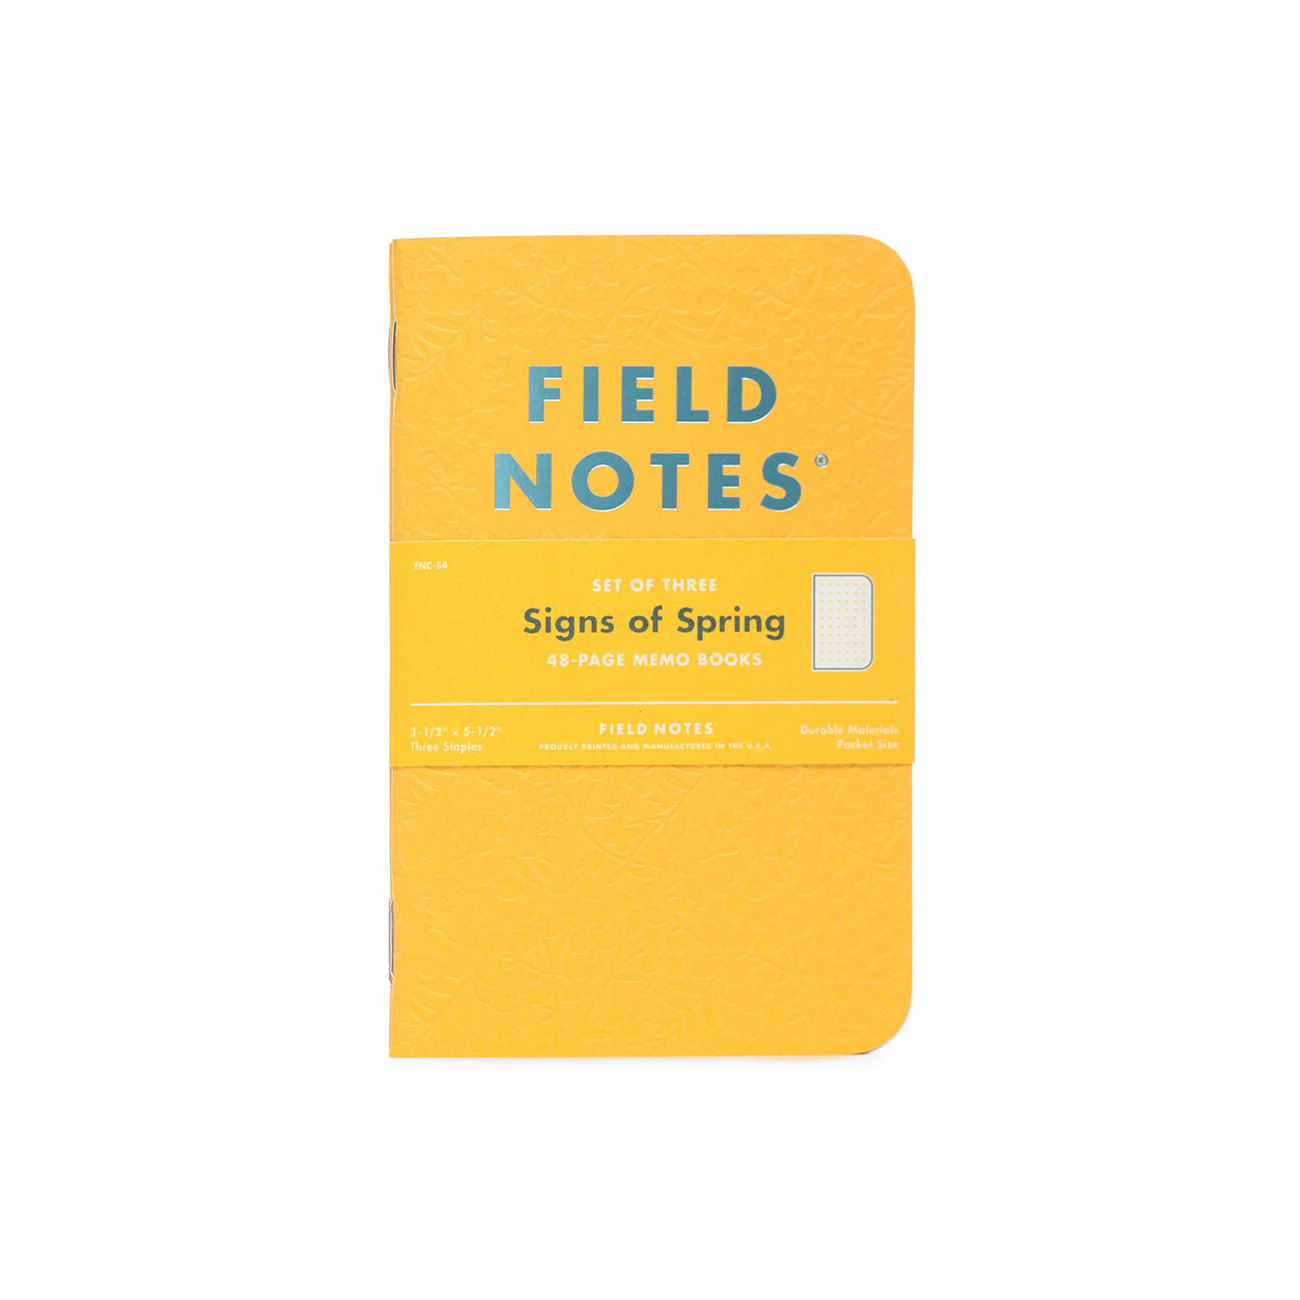 FIELD NOTES – SIGNS OF SPRING